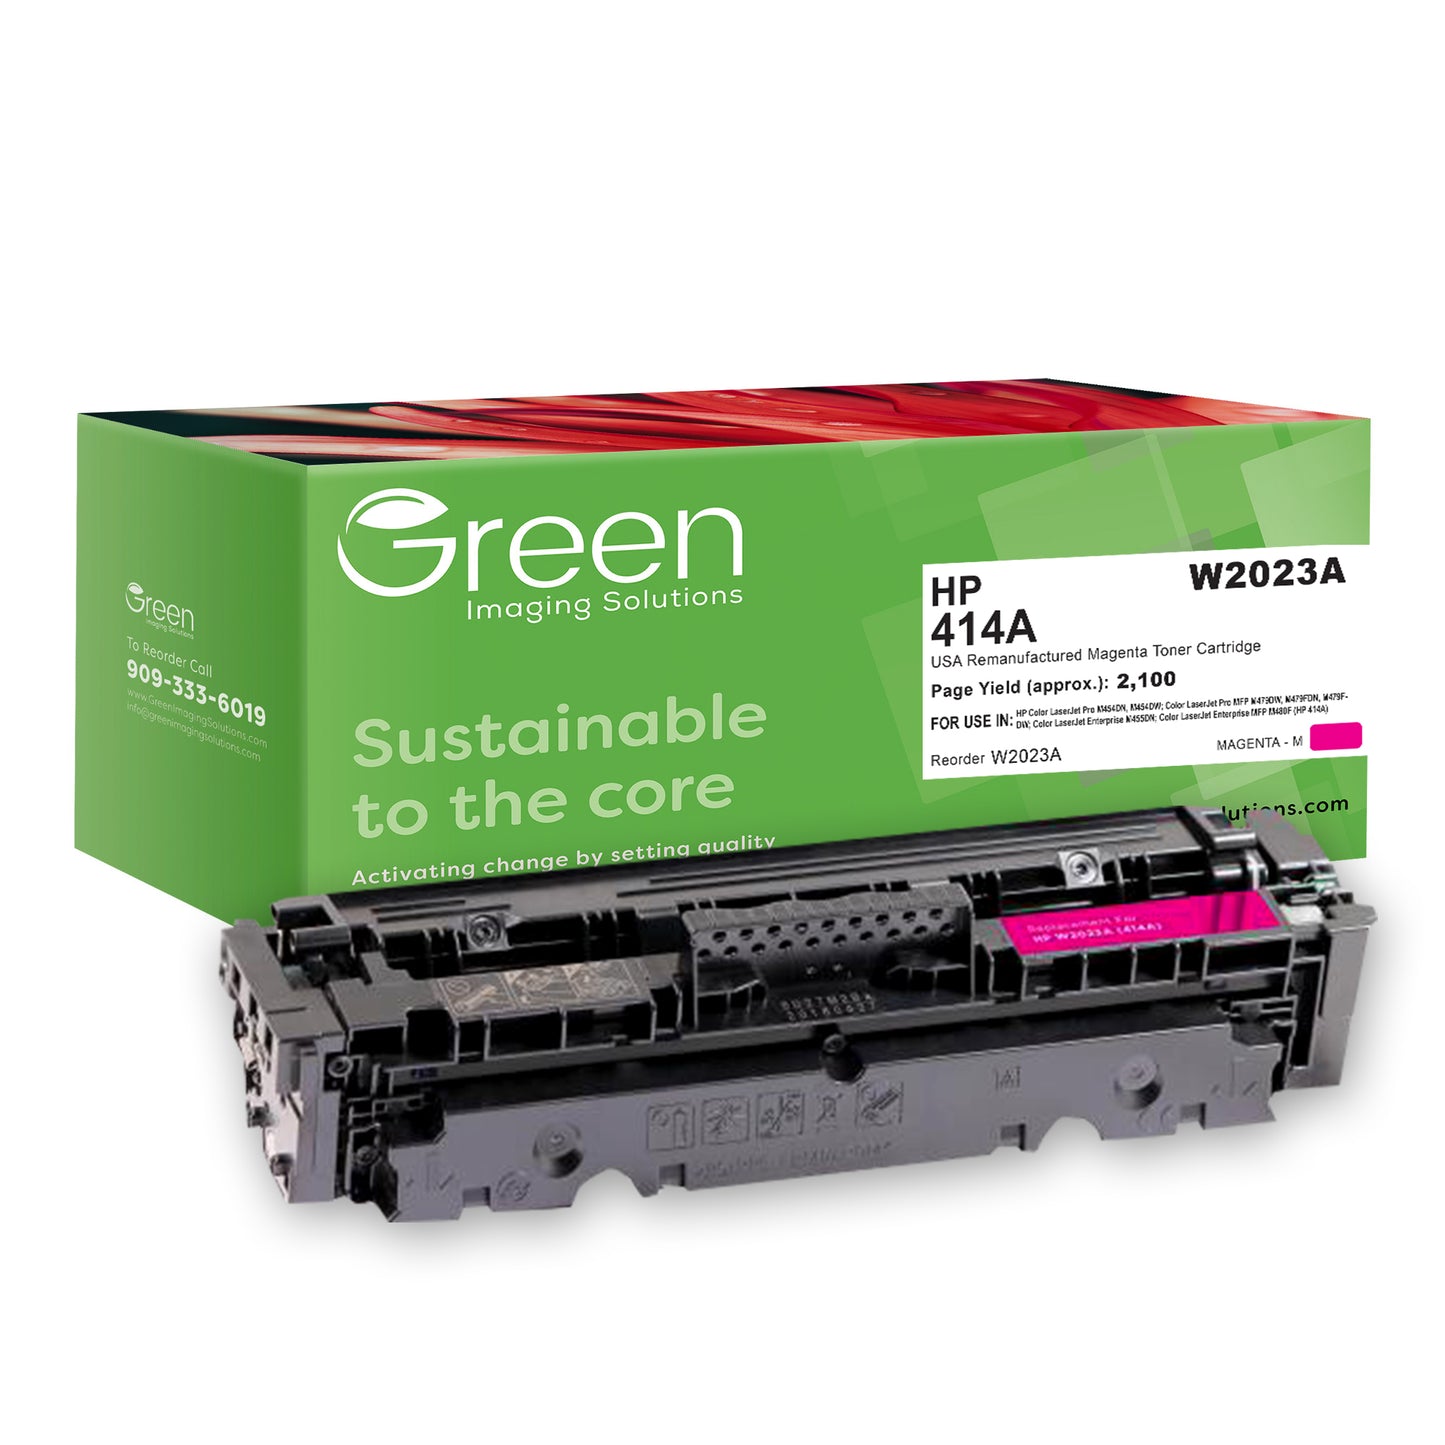 GIS USA Remanufactured Magenta Toner Cartridge for HP W2023A (HP 414A)